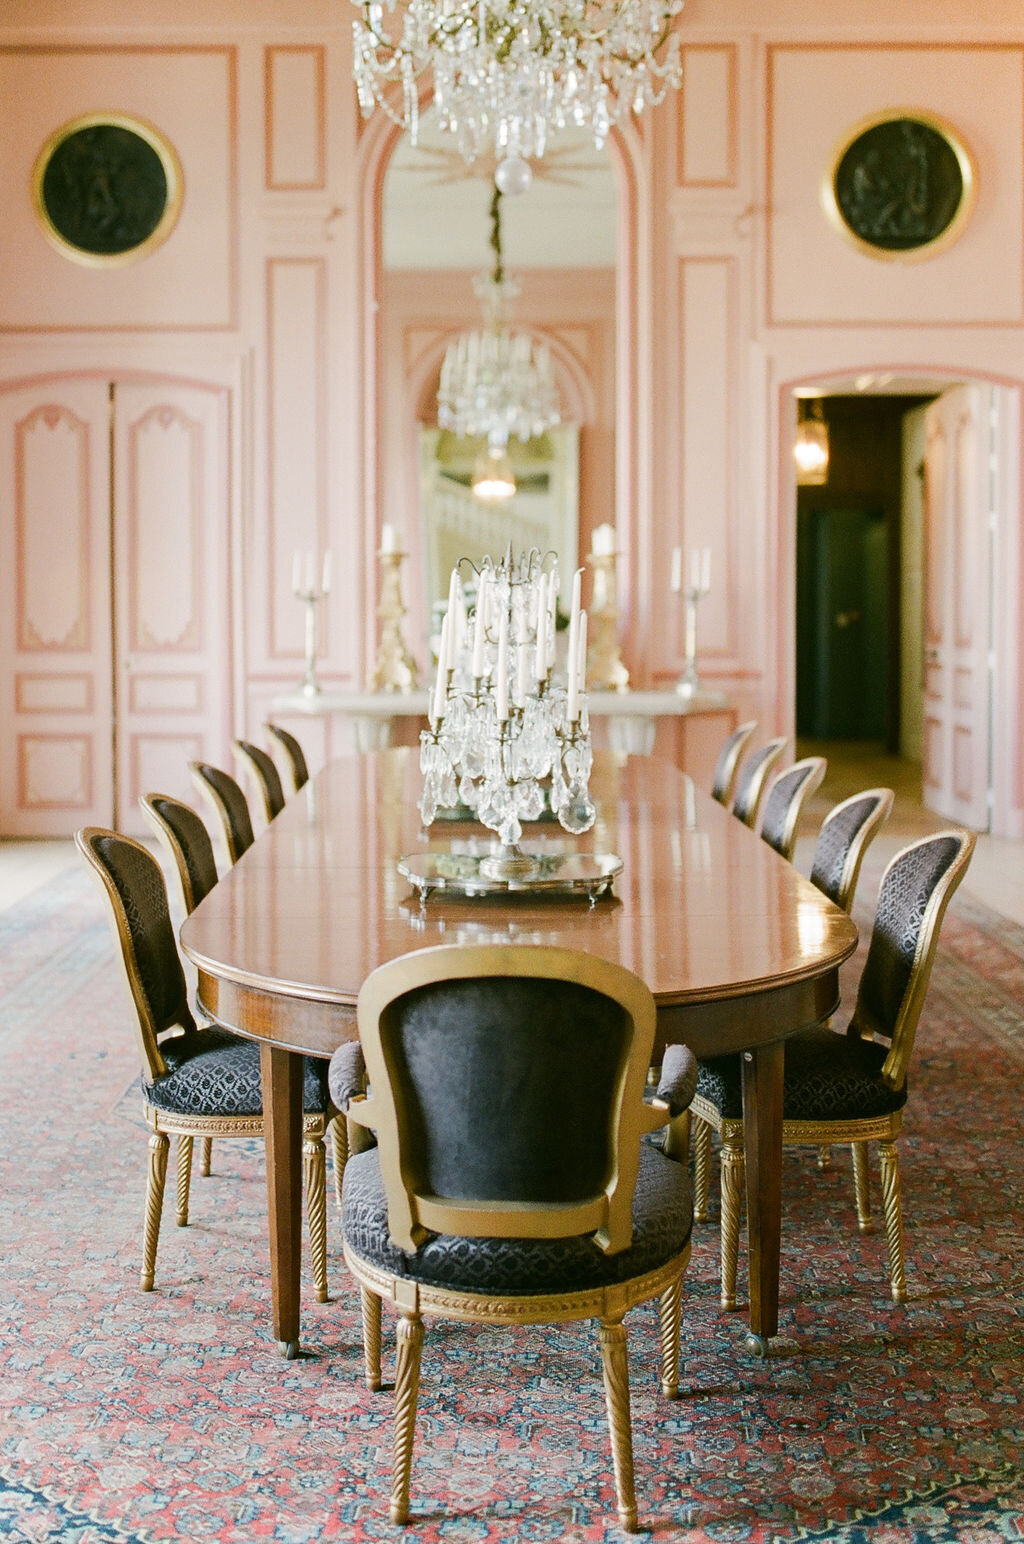 Molly-Carr-Photography-Chateau-Grand-Luce-Marie-Antoinette-113